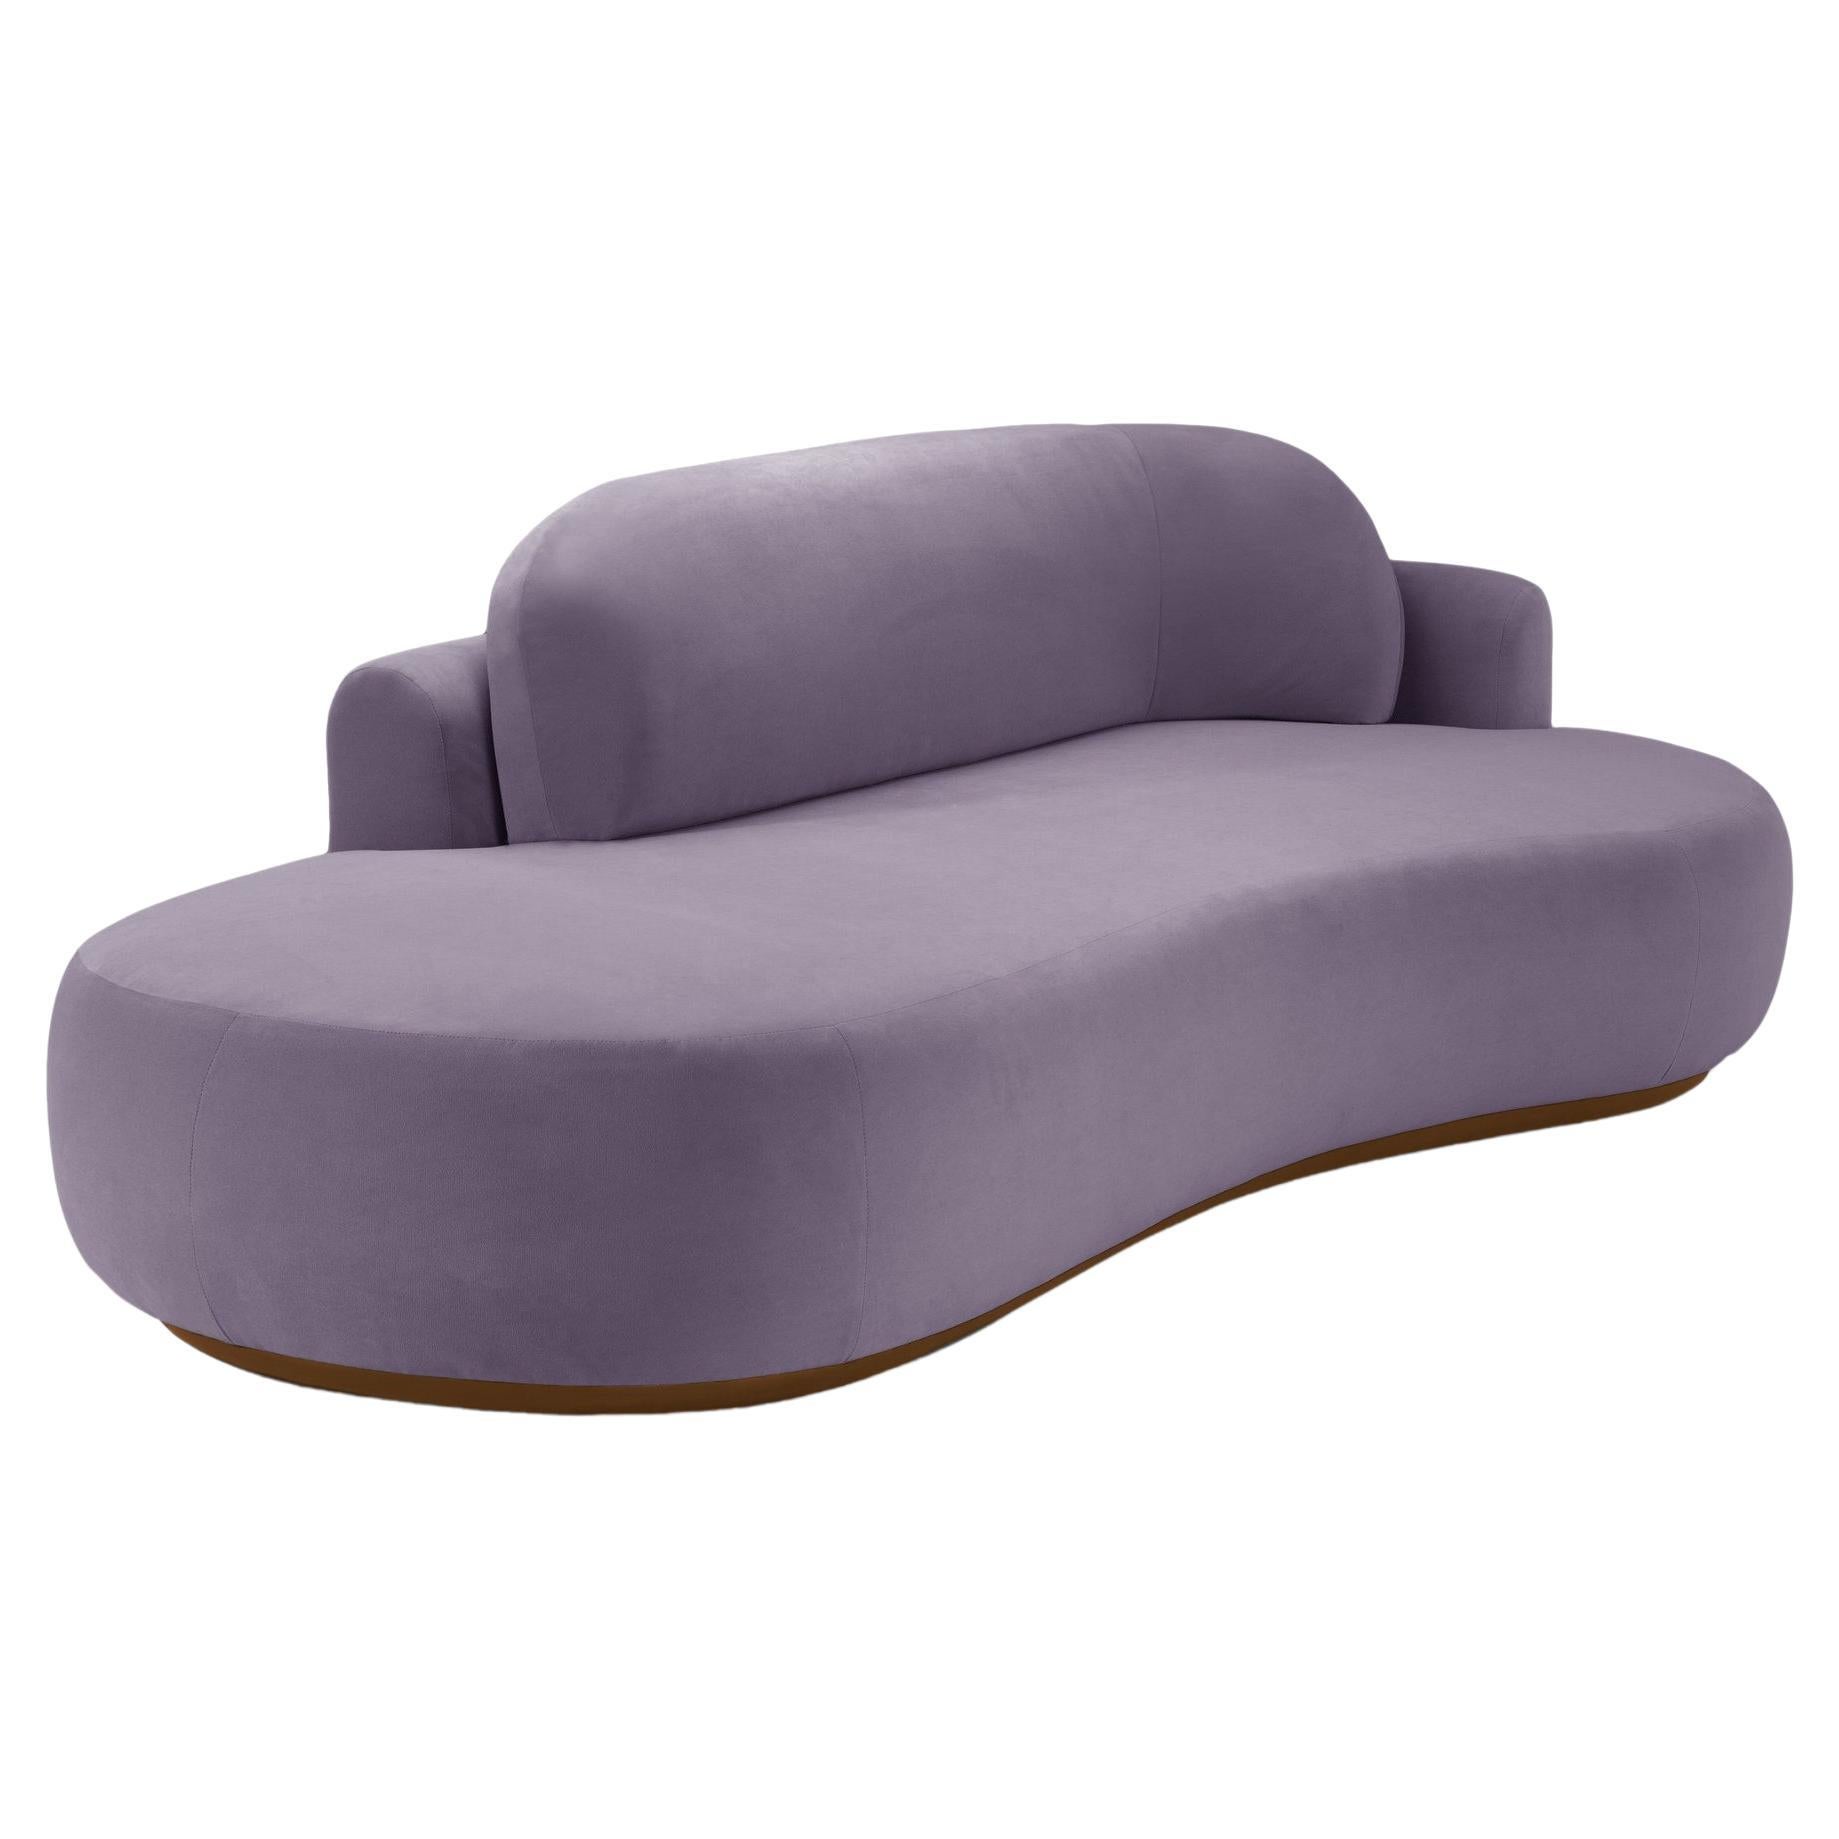 Naked Curved Sofa Single with Beech Ash-056-1 and Paris Lavanda